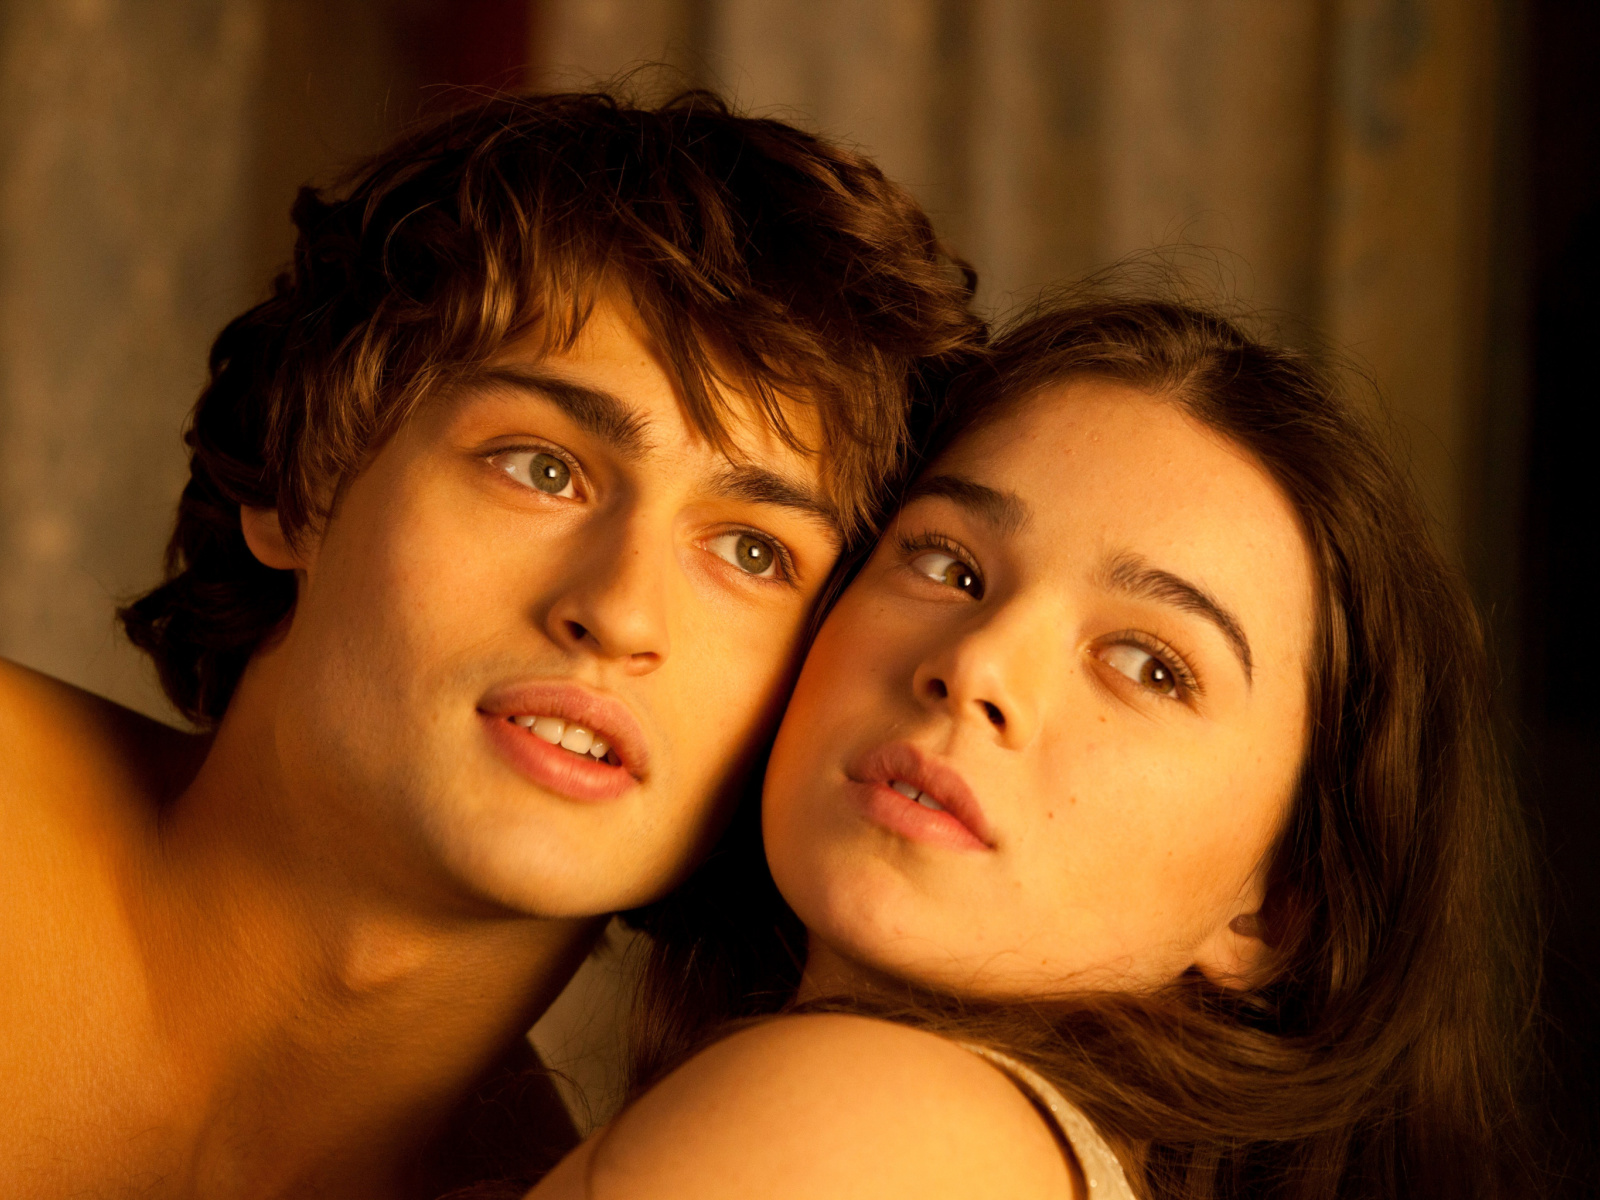 Romeo and Juliet with Hailee Steinfeld and Douglas Booth screenshot #1 1600x1200